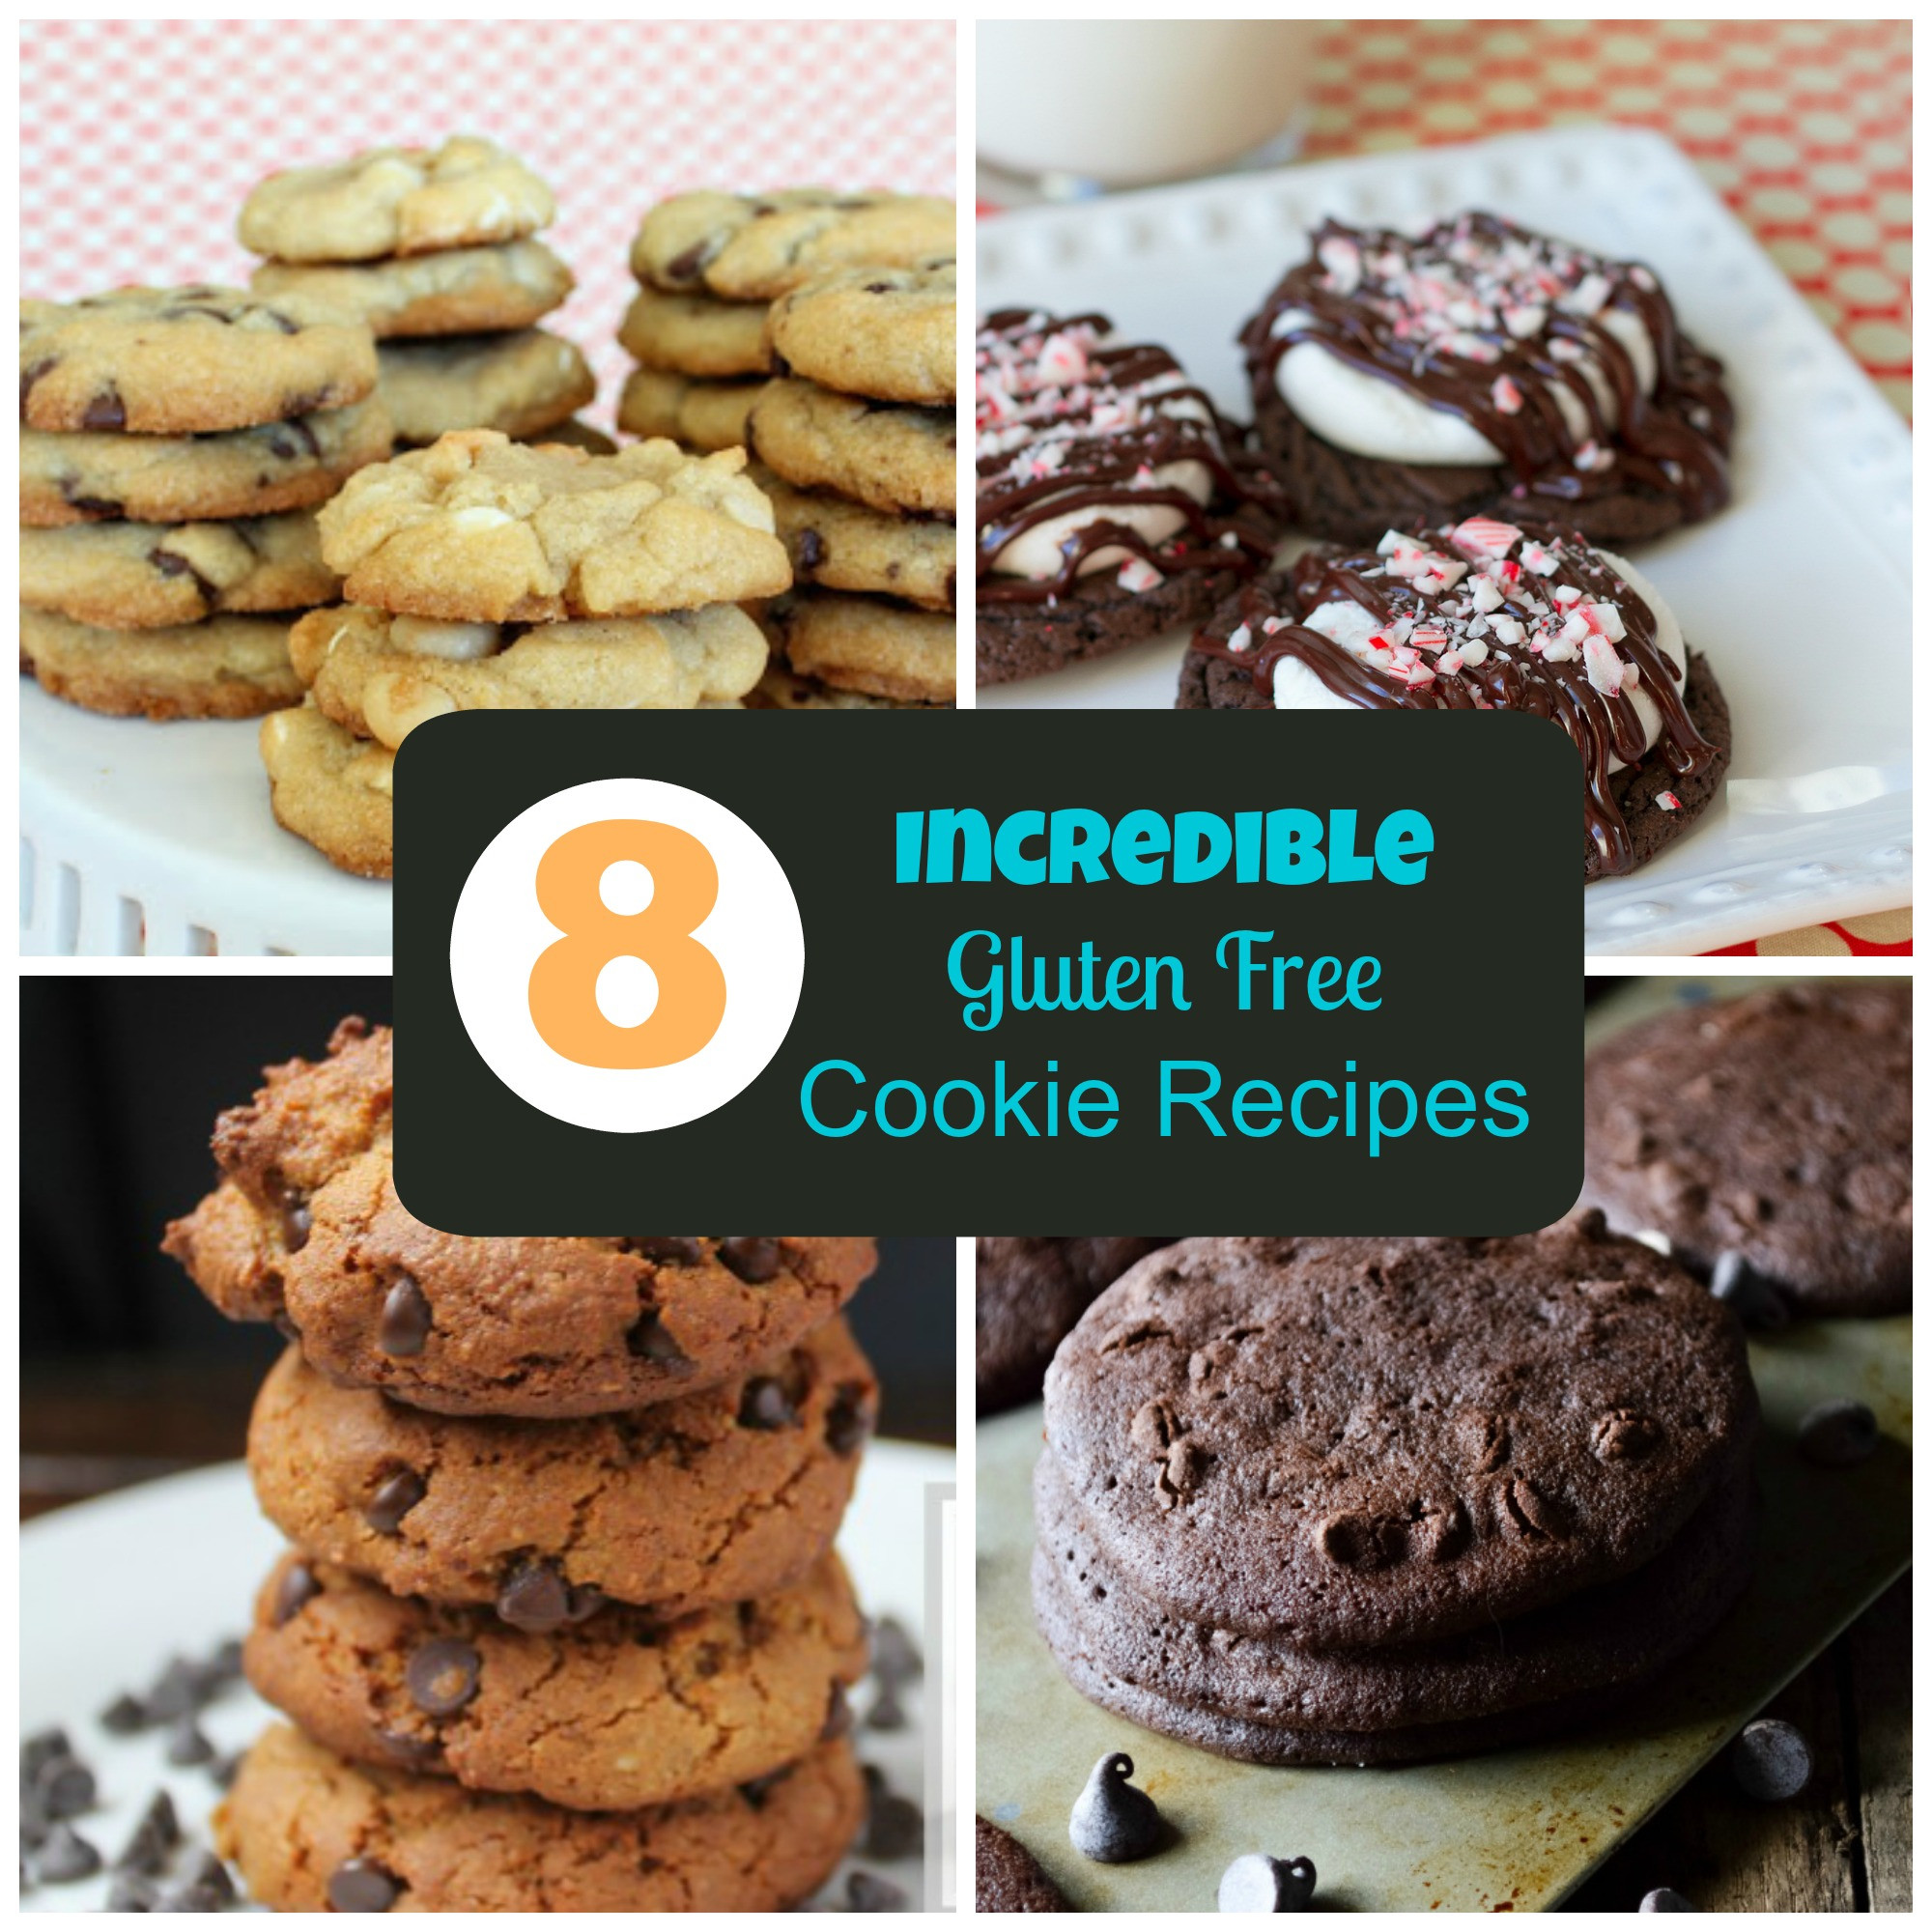 Gluten And Dairy Free Cookie Recipes
 Gluten Free Cookie Recipes